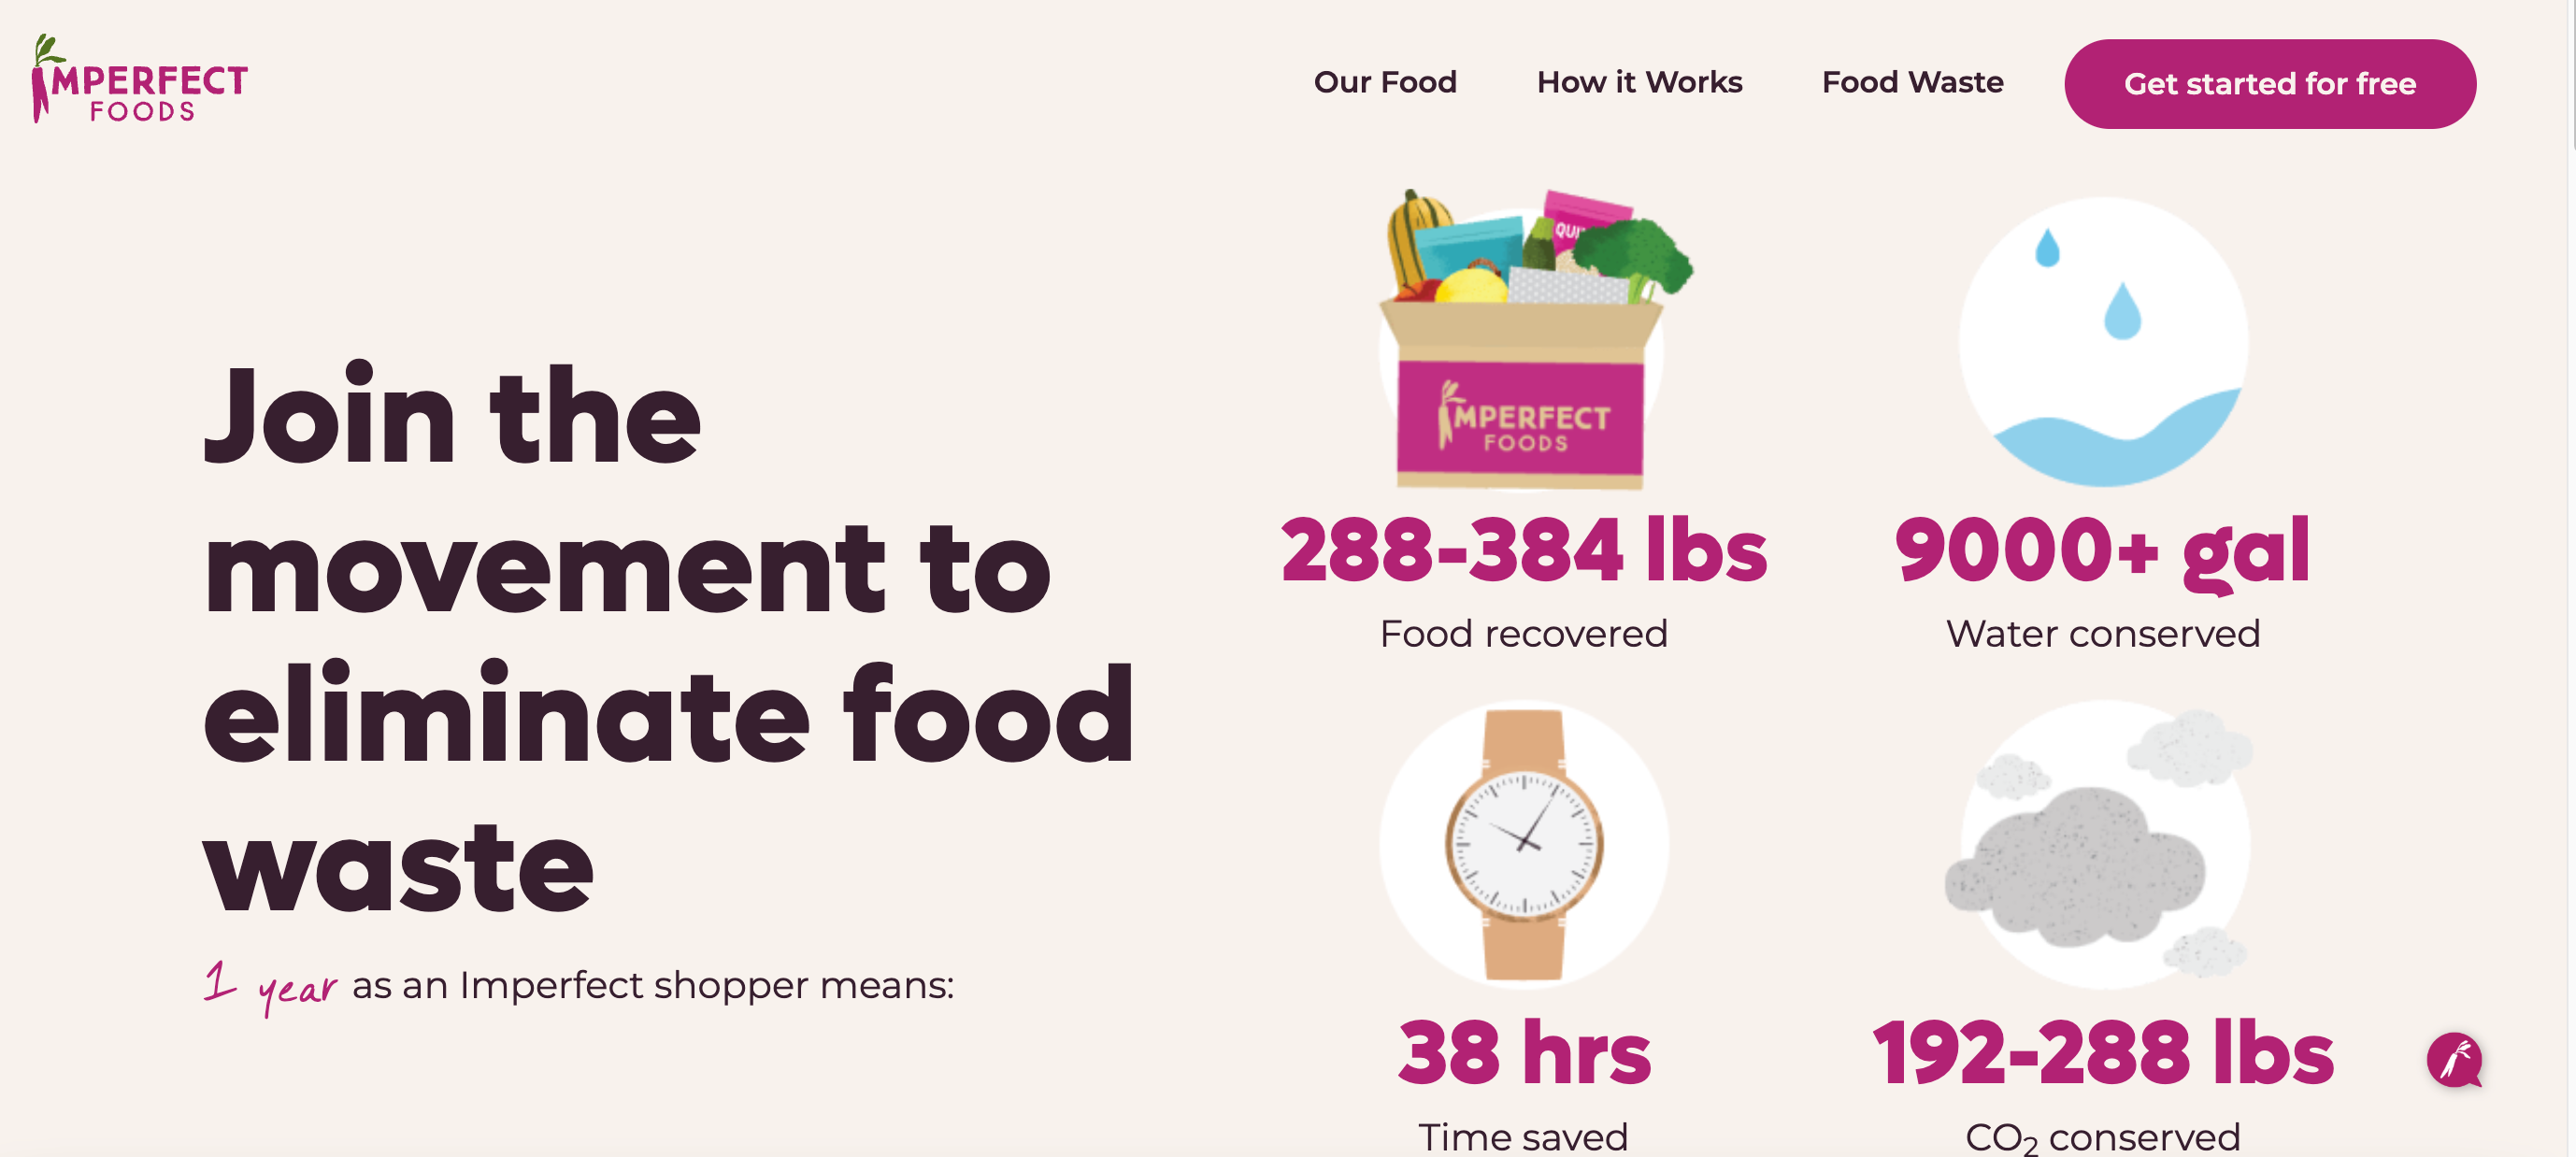 Imperfect food, food waste, Imperfect Foods sustainability and green marketing 